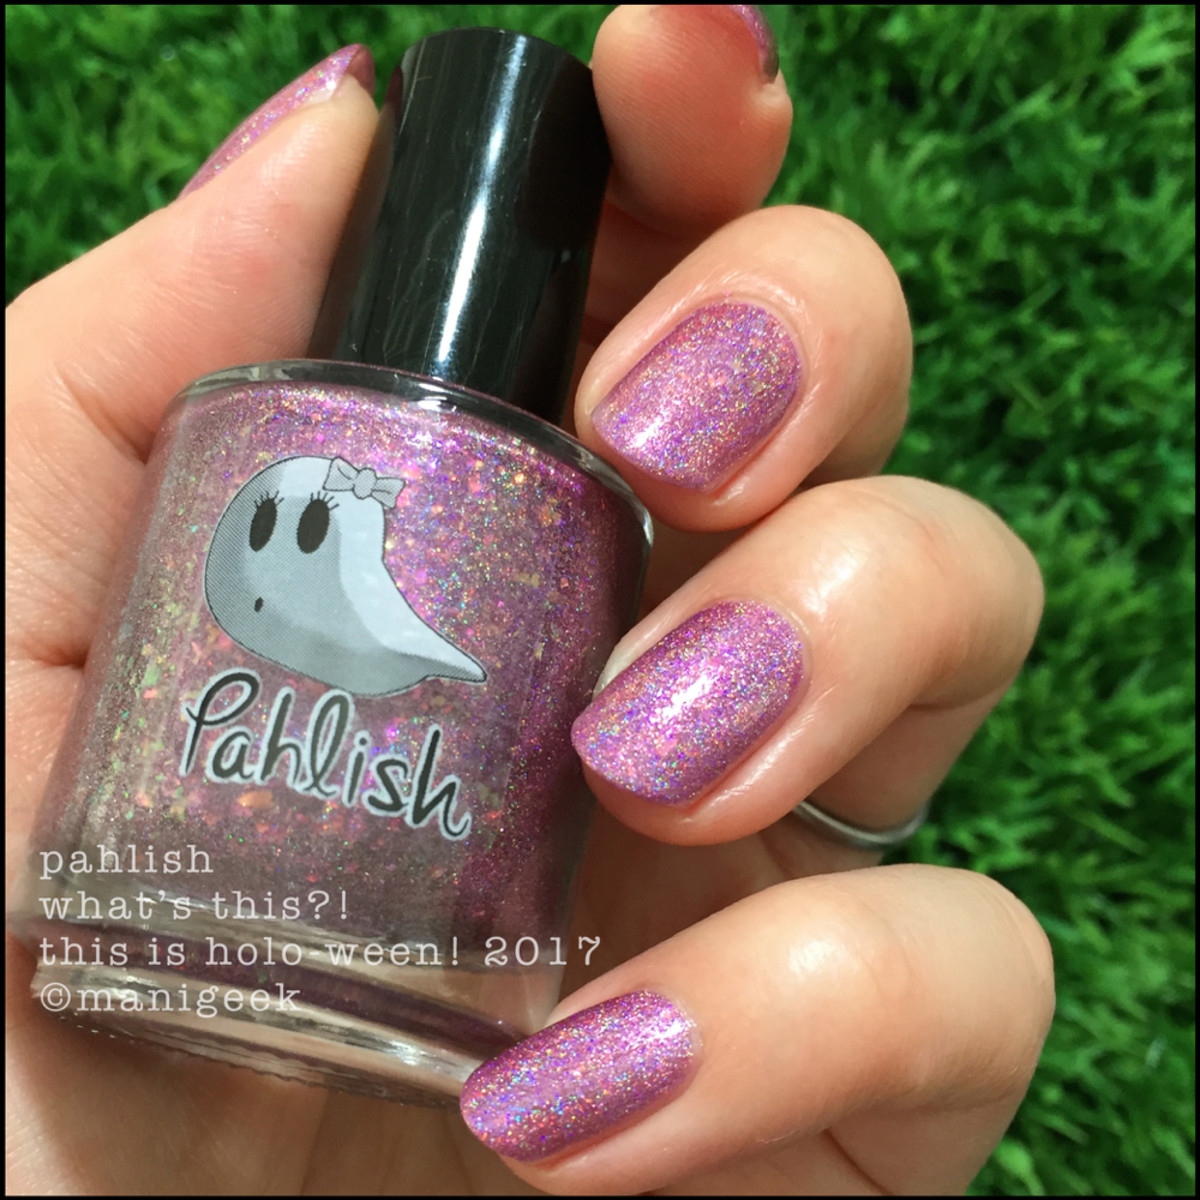 Pahlish What's This?! - This is Holo-ween! 2017